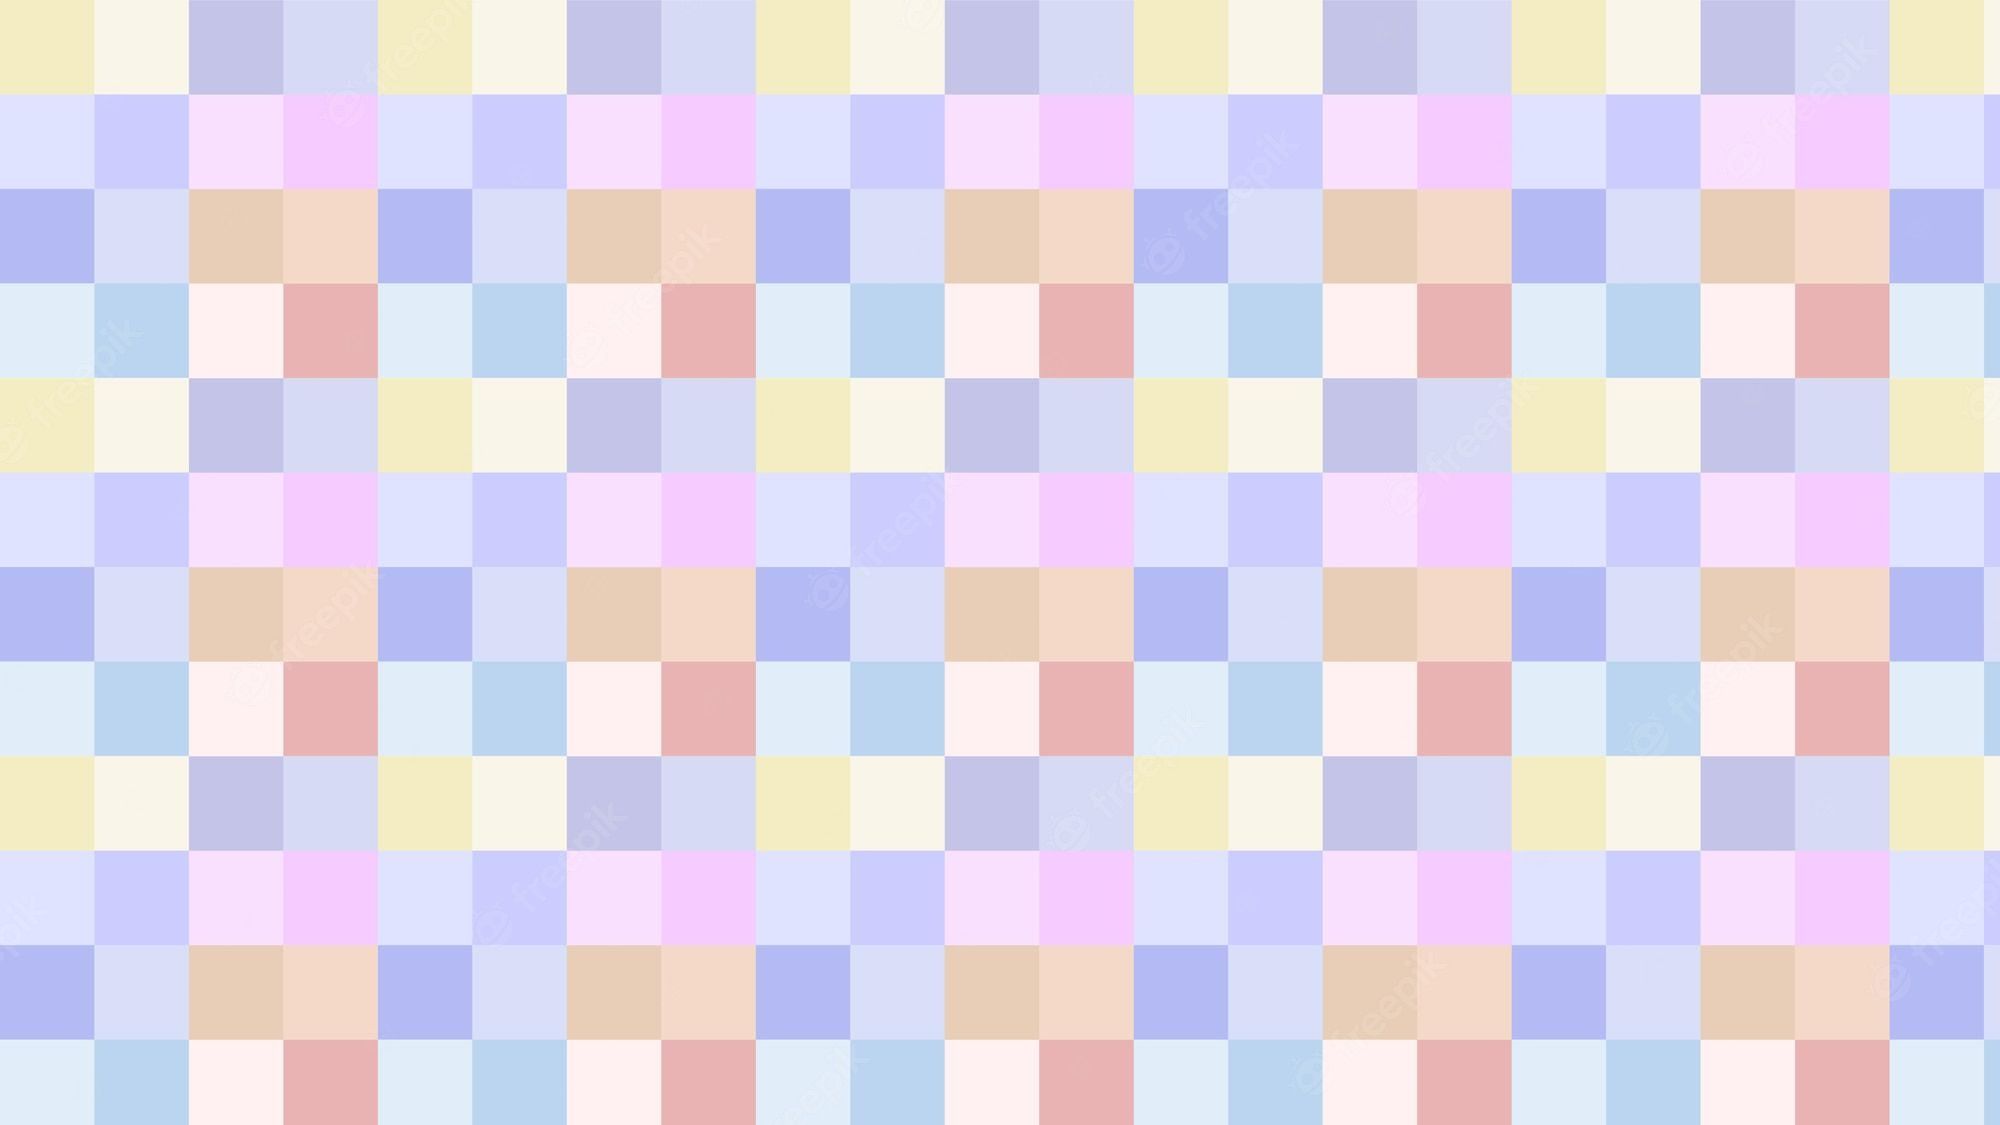 A pattern of squares in different colors - Pastel orange, pastel rainbow